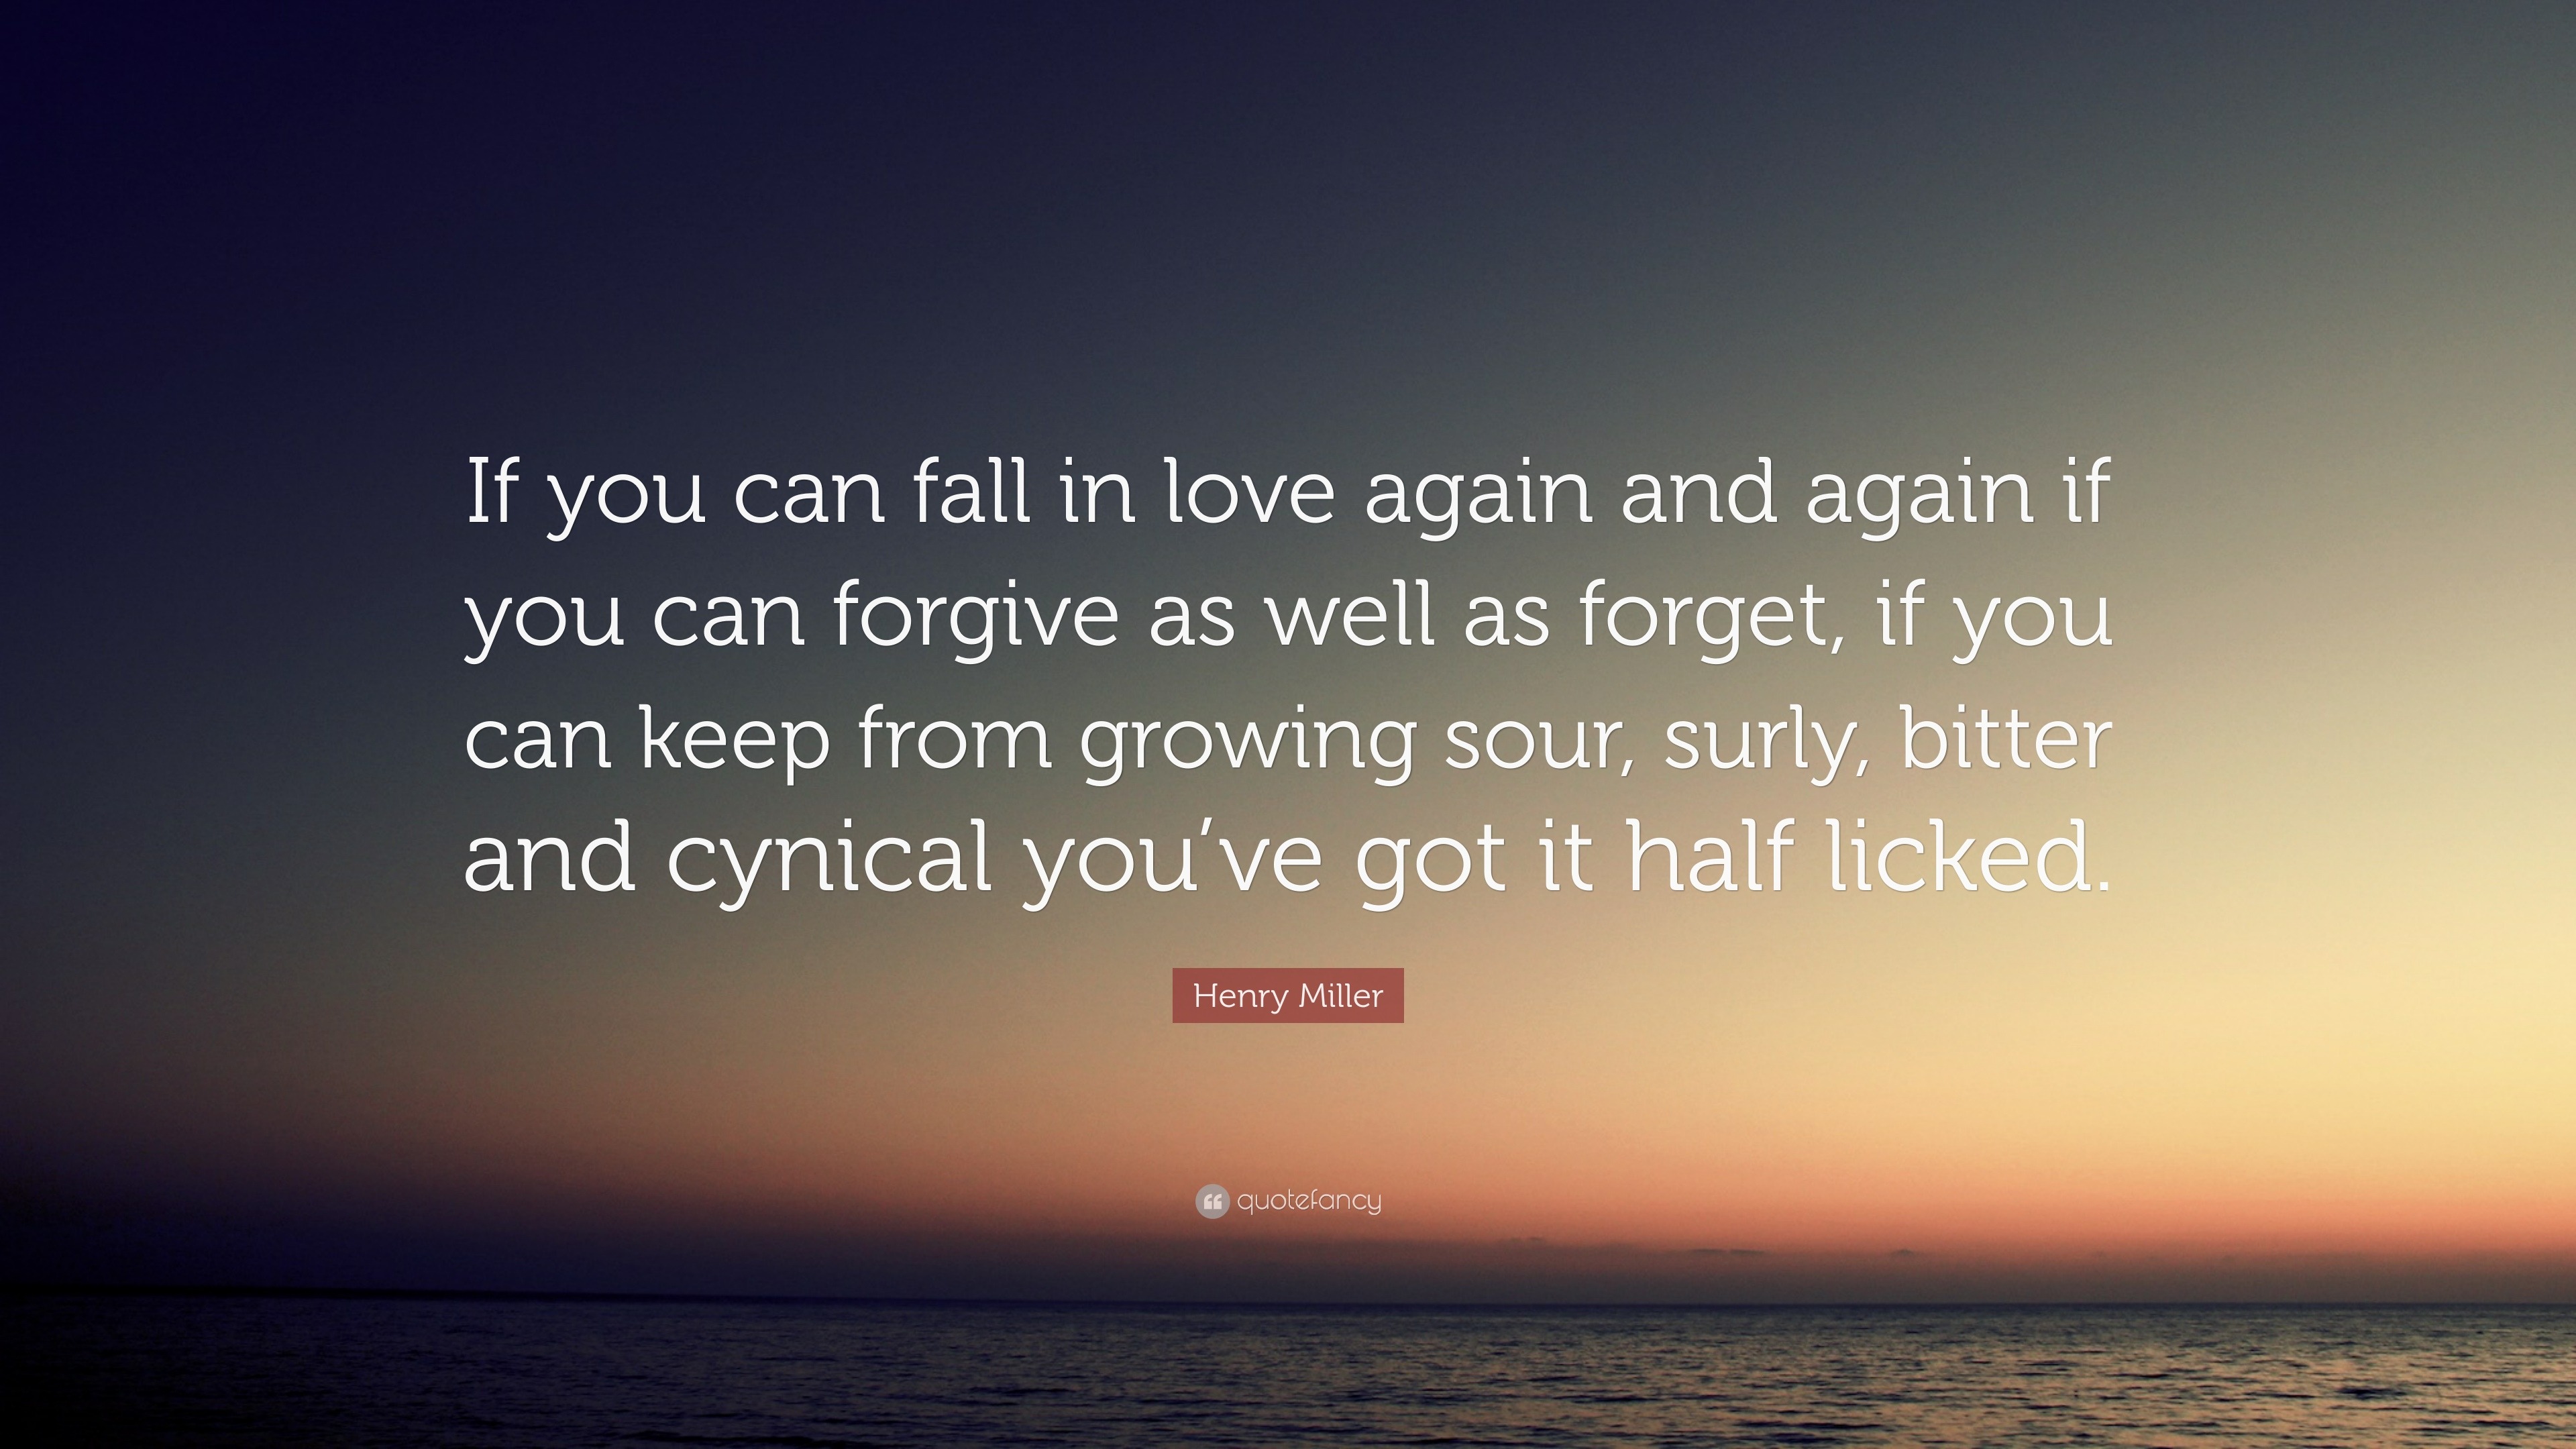 Henry Miller Quote “If you can fall in love again and again if you